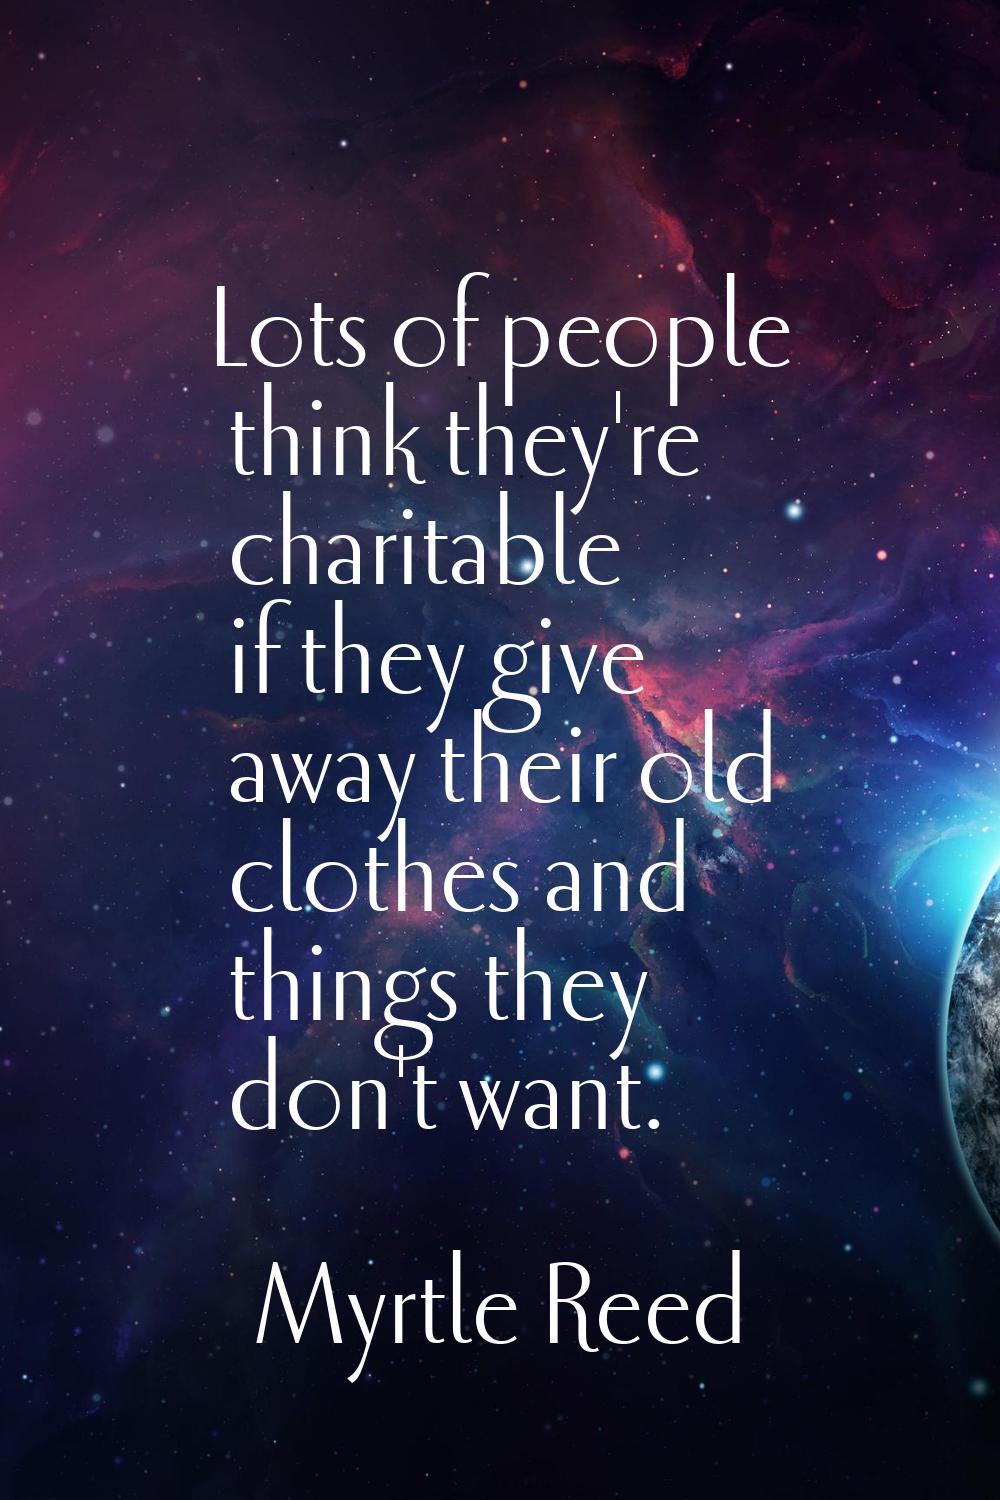 Lots of people think they're charitable if they give away their old clothes and things they don't w